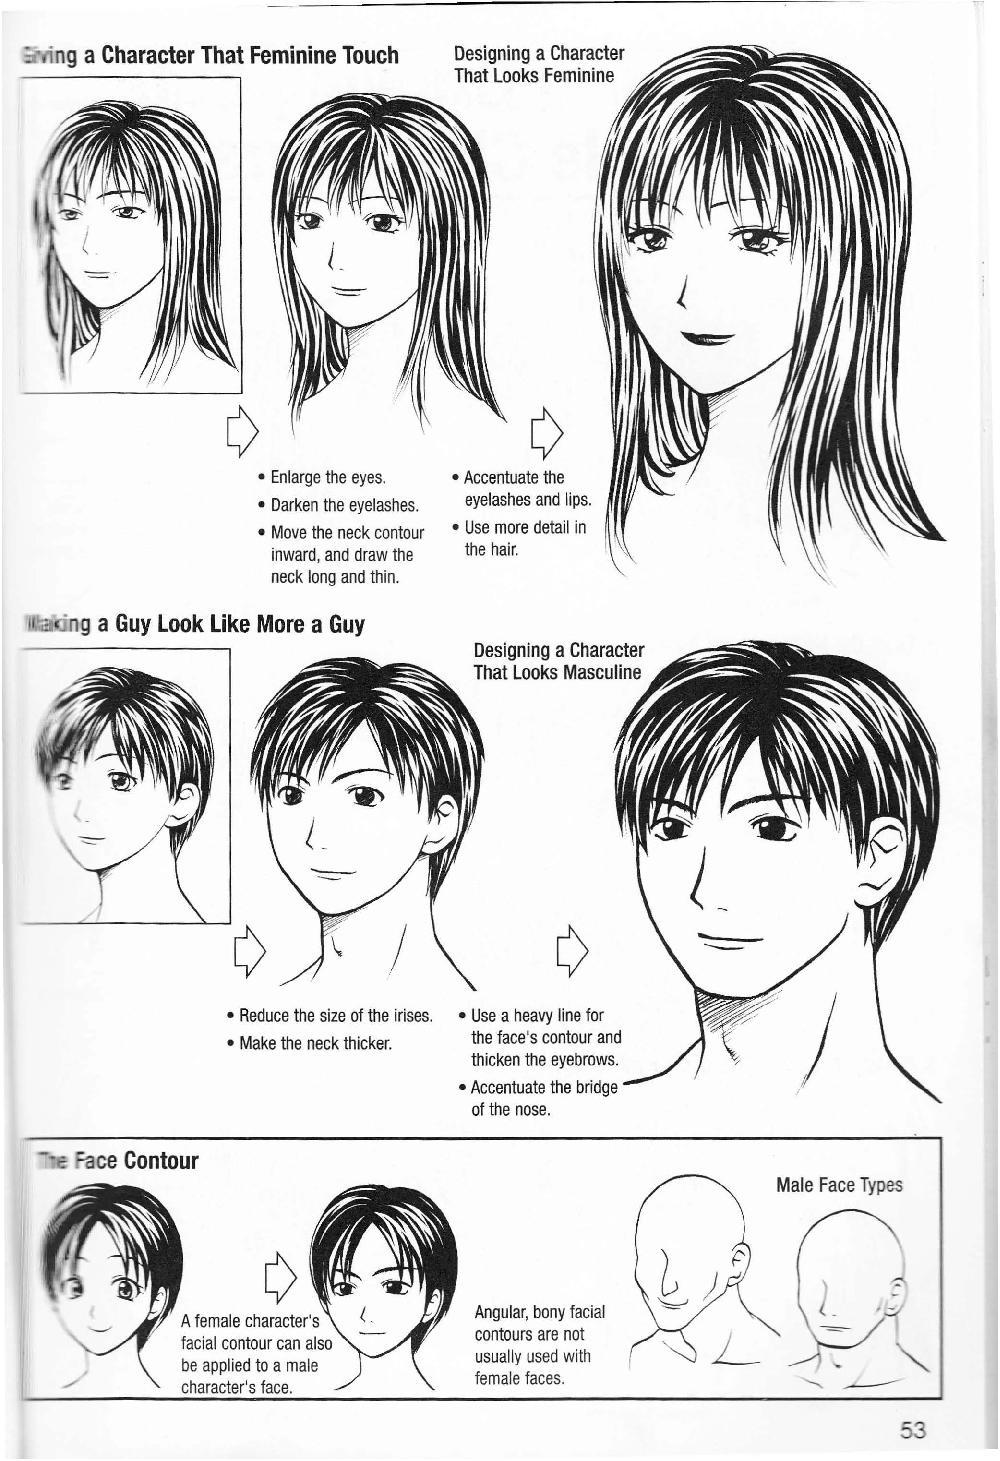 More How to Draw Manga Vol. 2 - Penning Characters 54